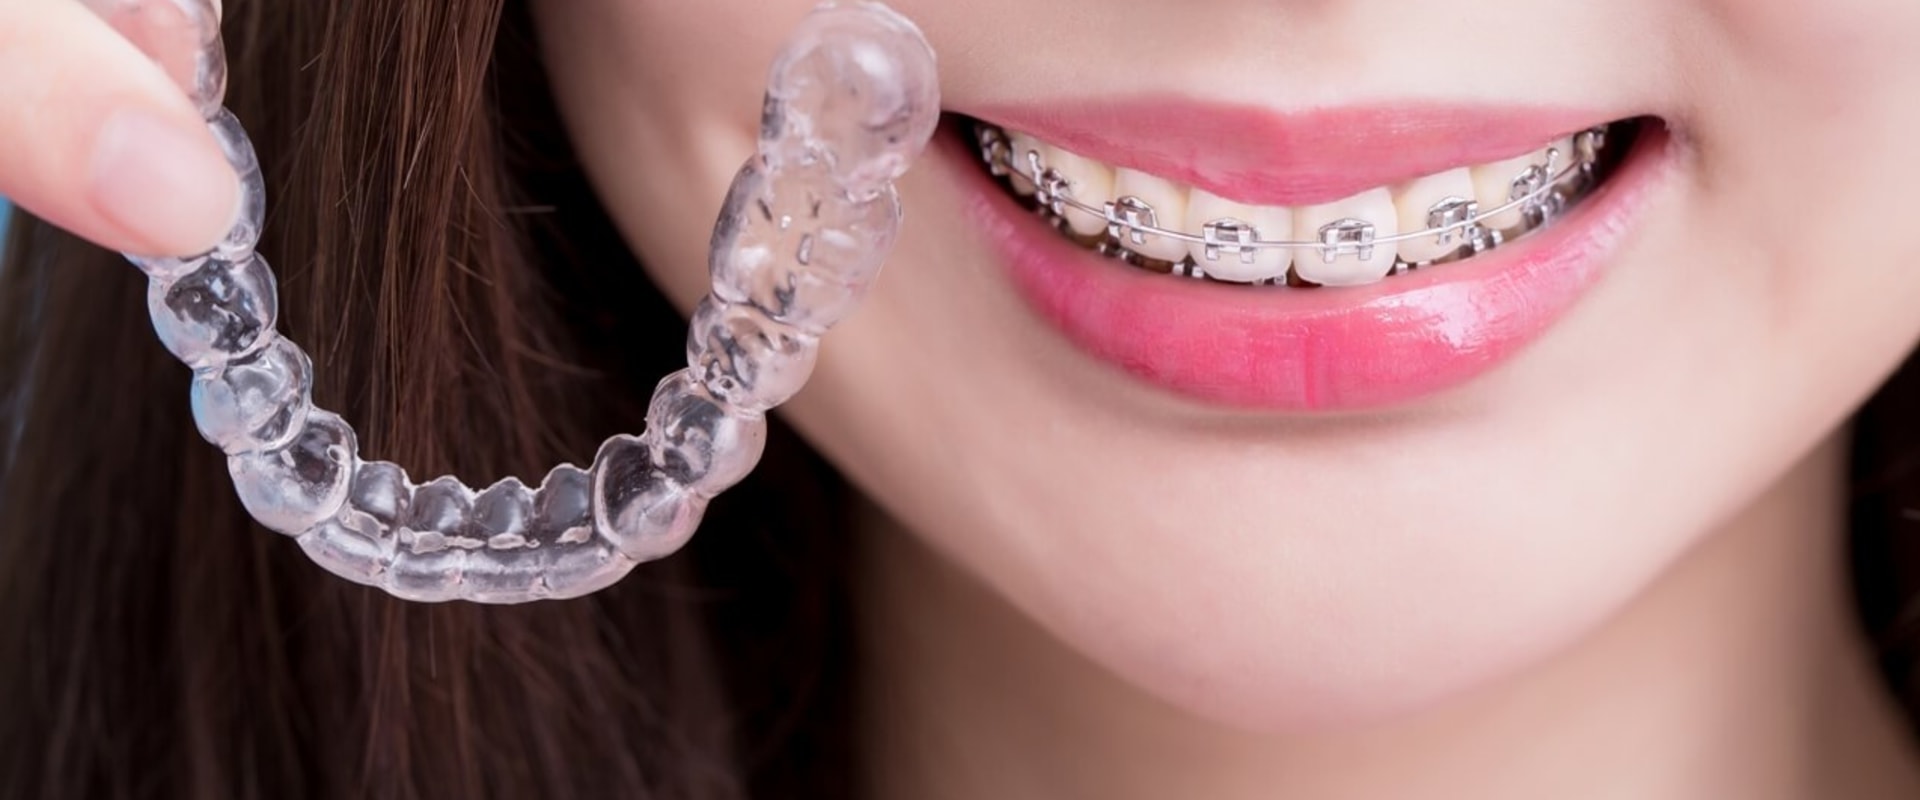 Are Invisalign Braces the Right Choice for You?